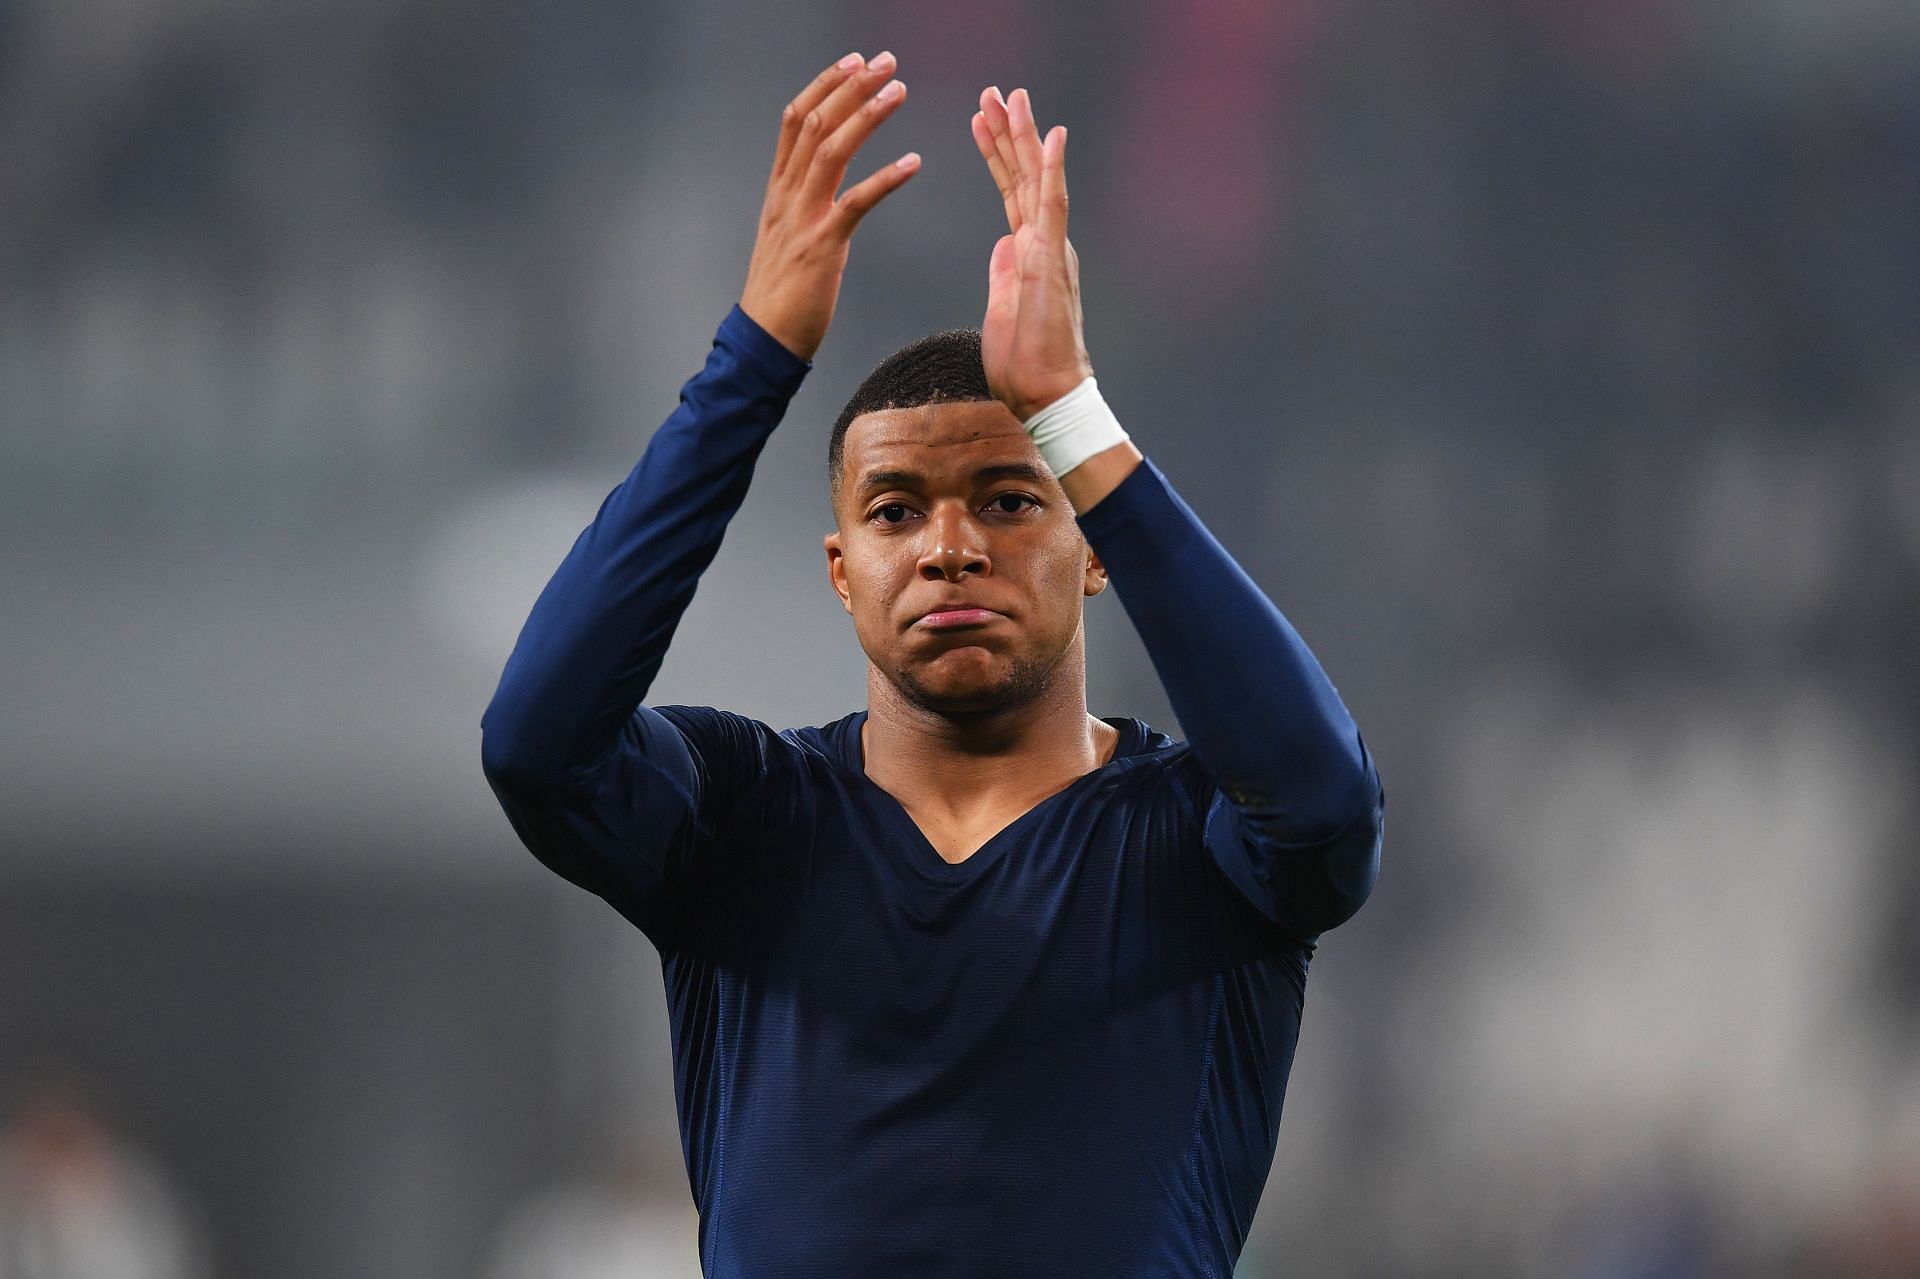 Kylian Mbappe is preparing to lit up the 2022 FIFA World Cup.